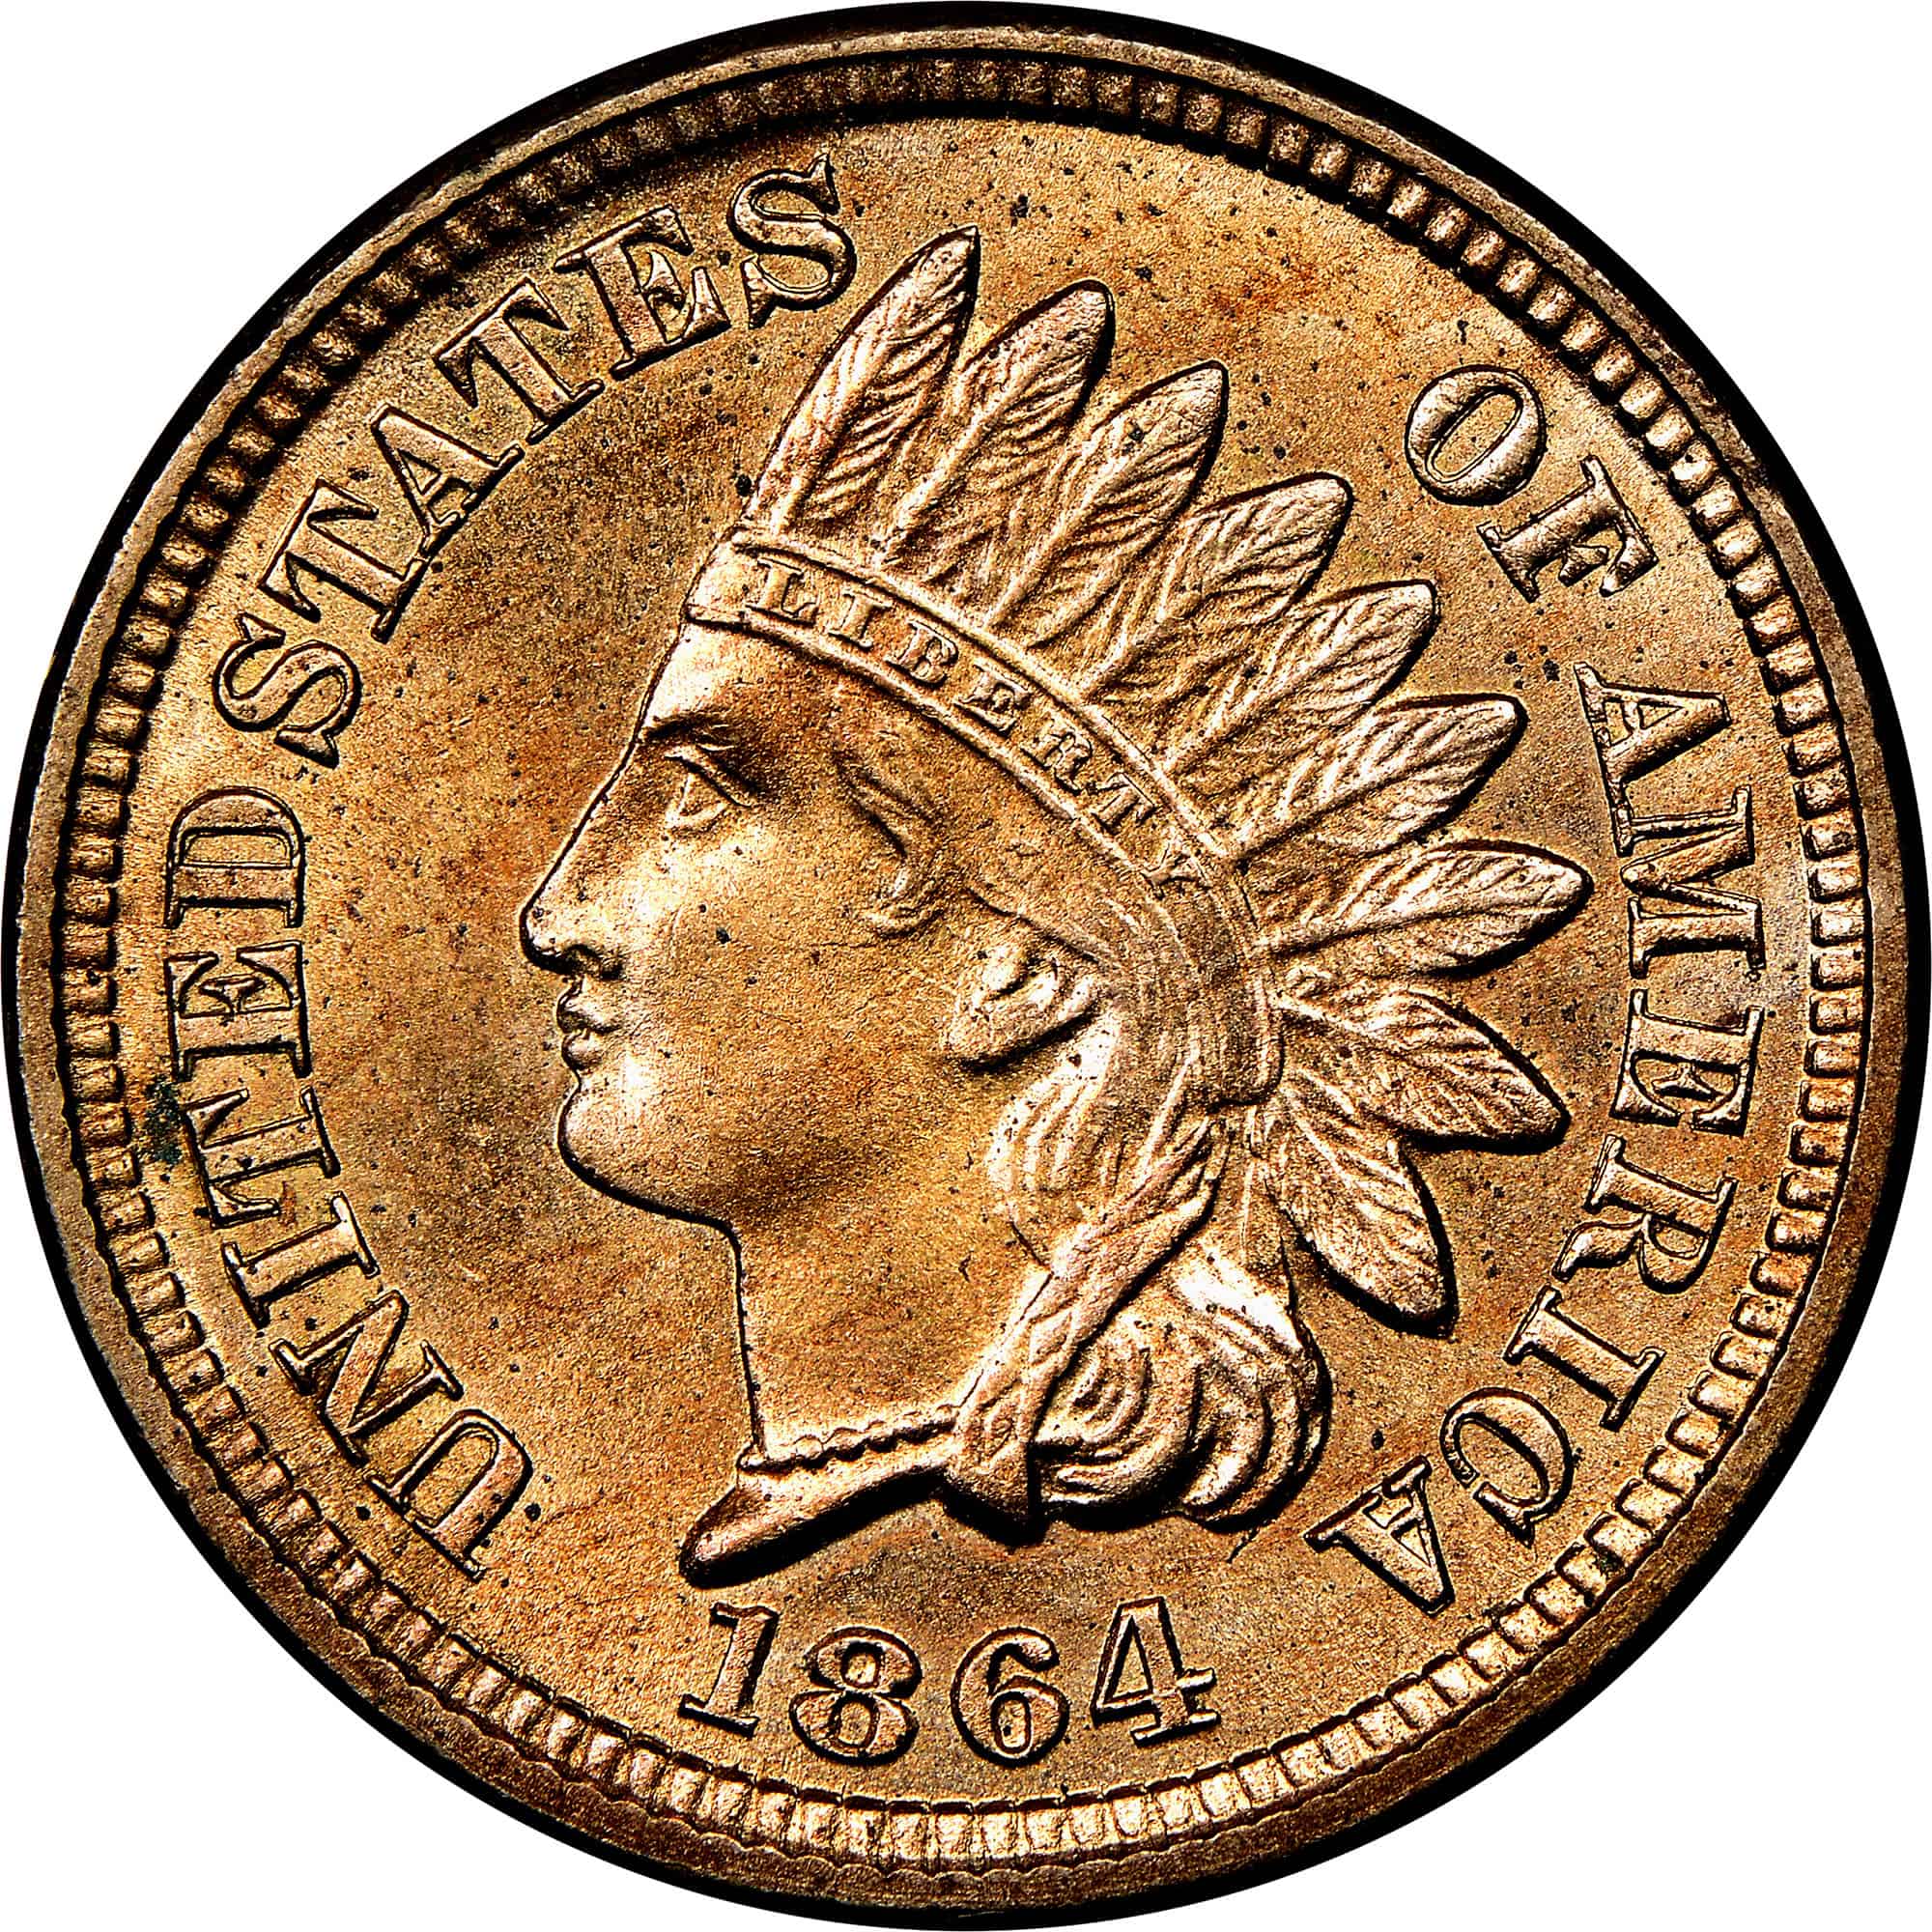 The Obverse of the 1864 Indian Head Penny